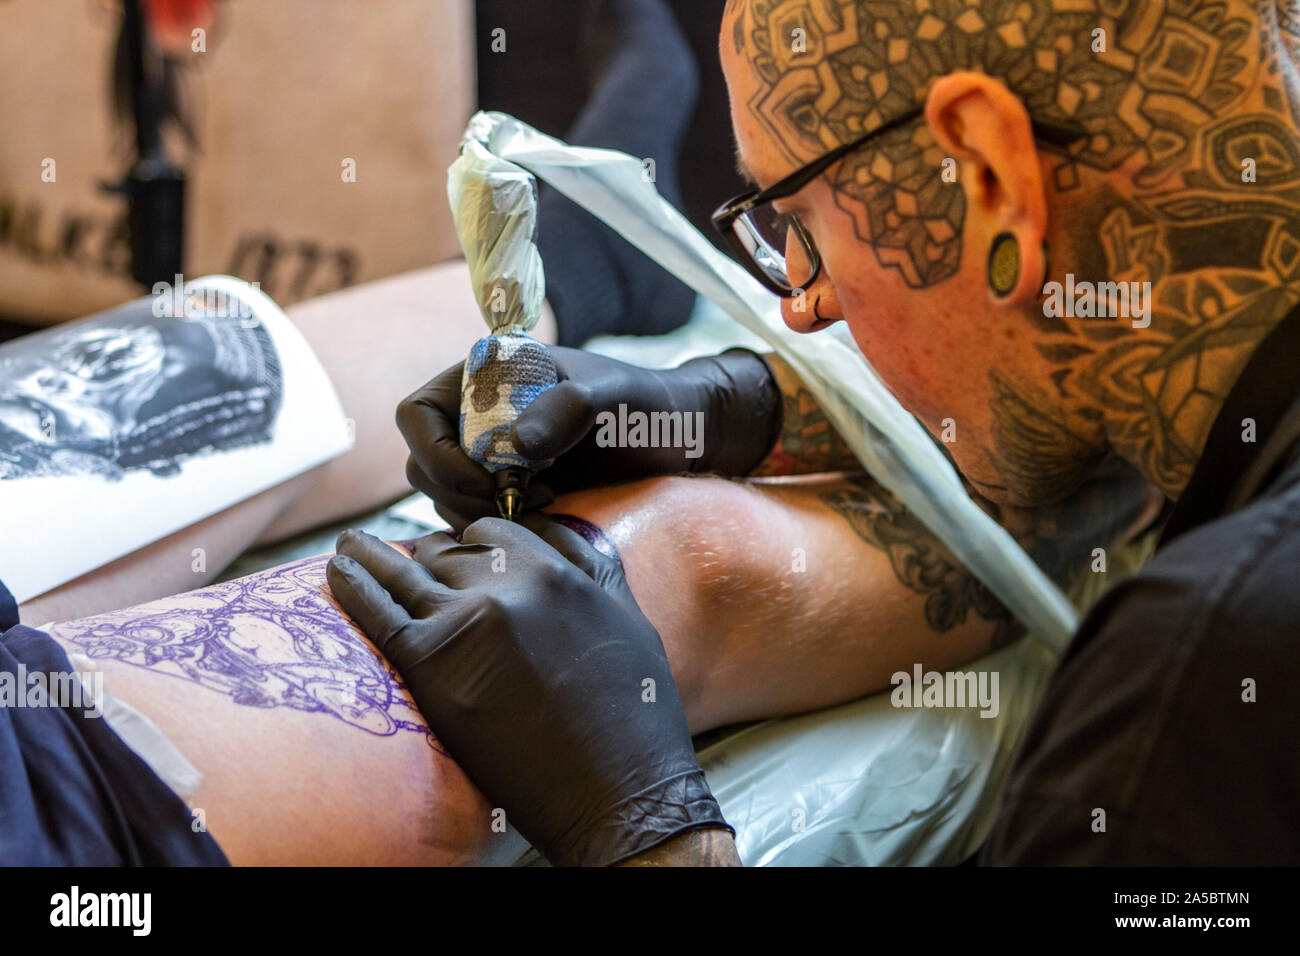 In Pictures No needle for visitors to international tattoo convention